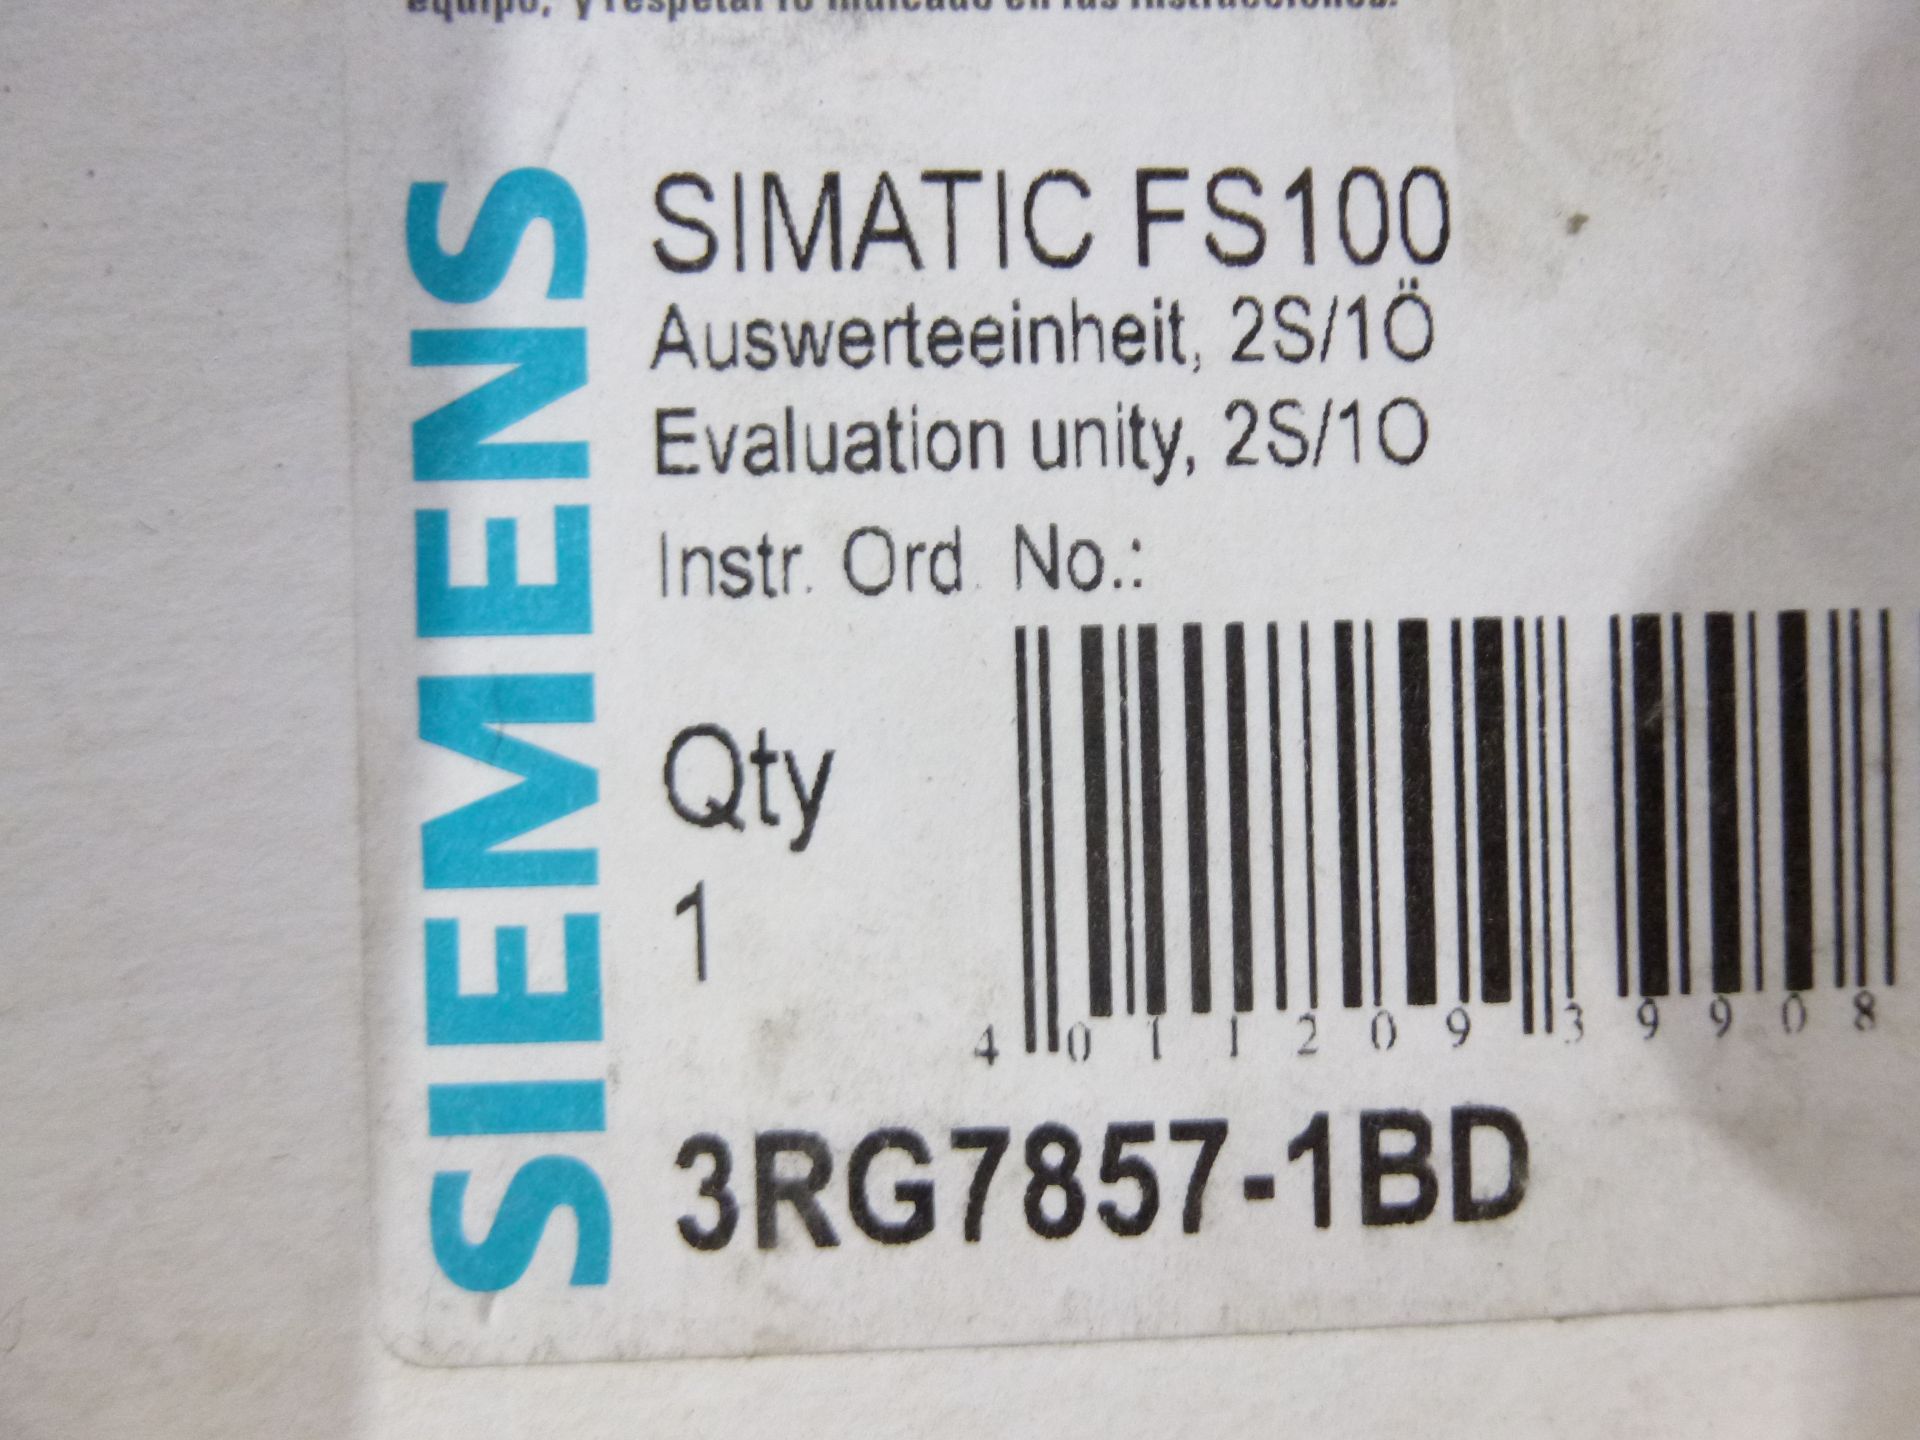 Qty 3 Siemens Simatic FS100, model 3RG7857-1BD, new in boxes, as always with Brolyn LLC auctions, - Image 2 of 2